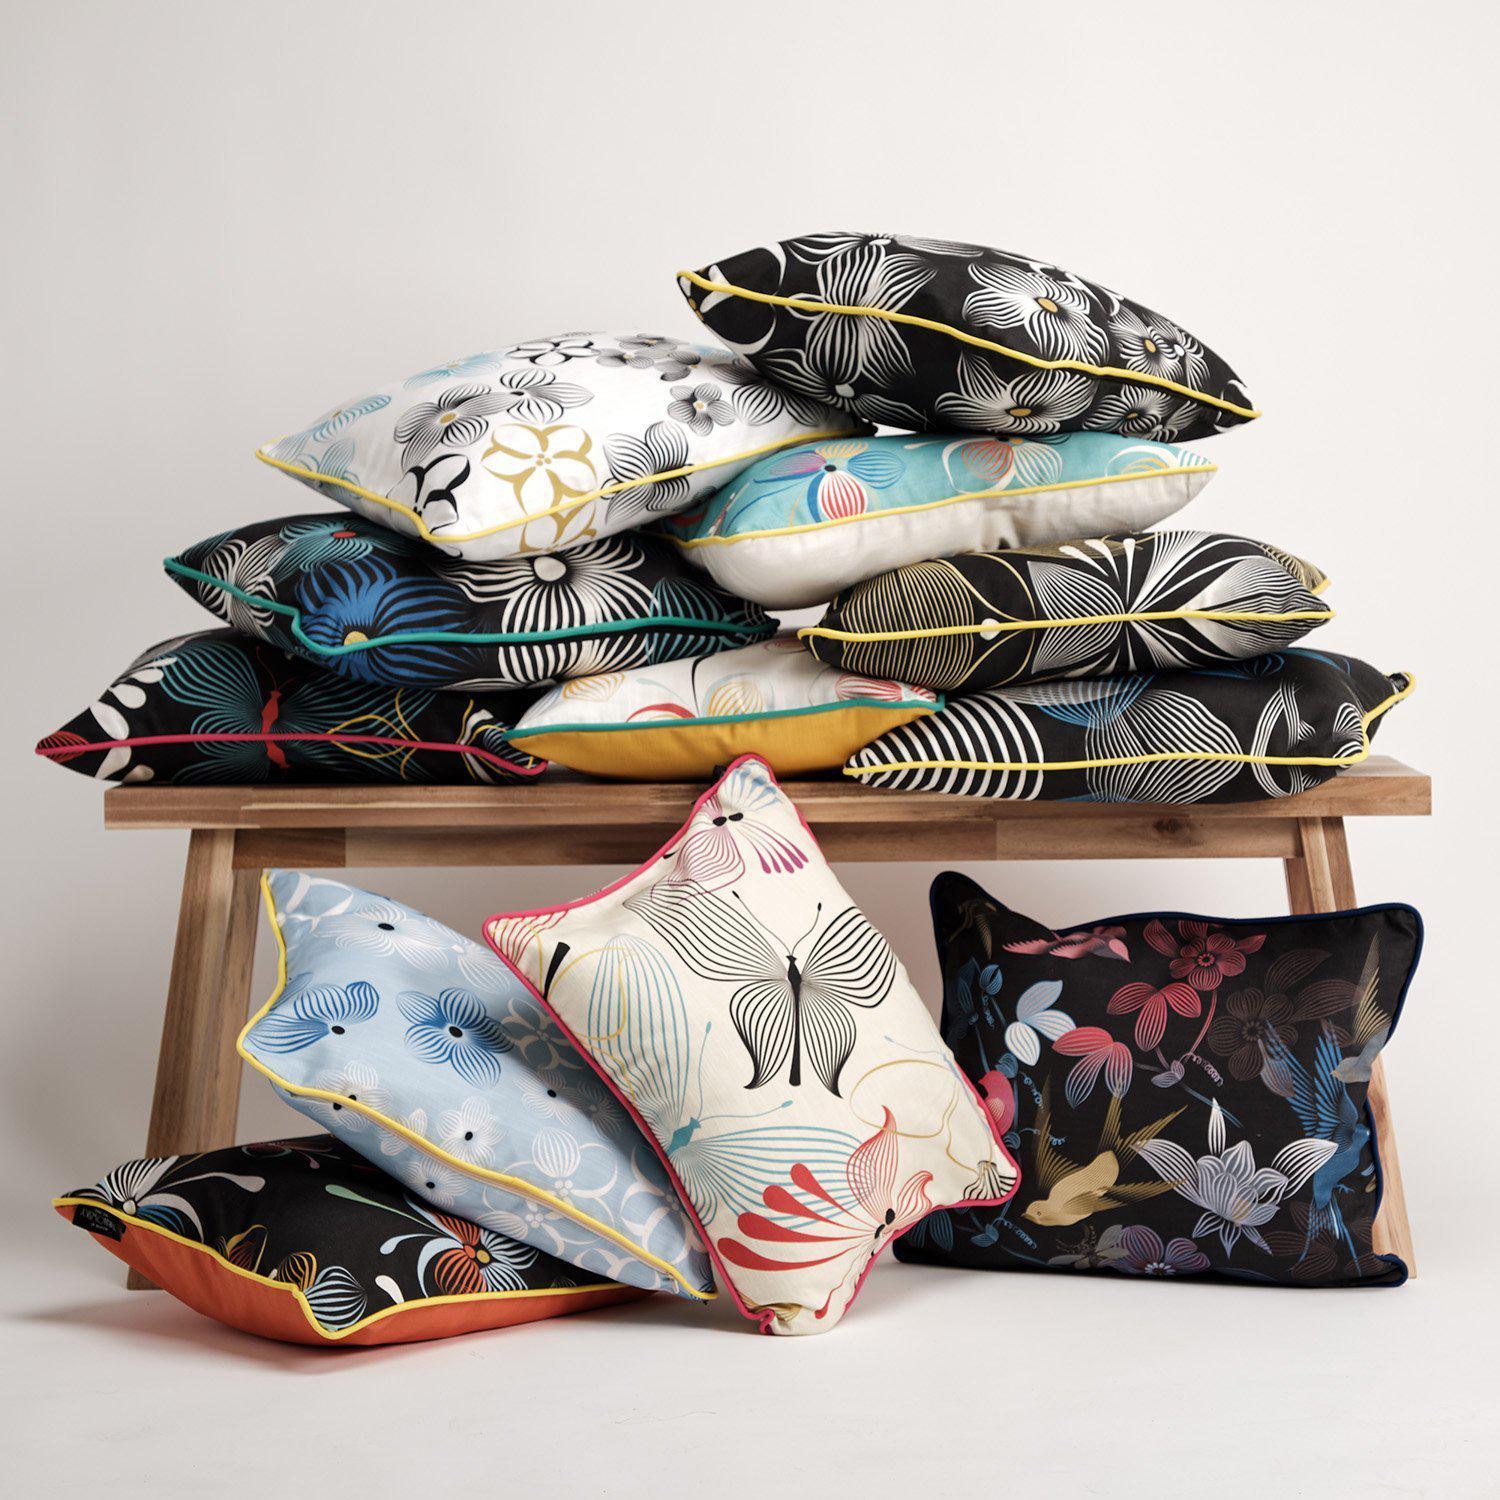 Flora Explosion ( Black) - Funky Art Cushion - Perfect Day - House Of Turnowsky Pillows - Handmade Cushions UK - WeLoveCushions